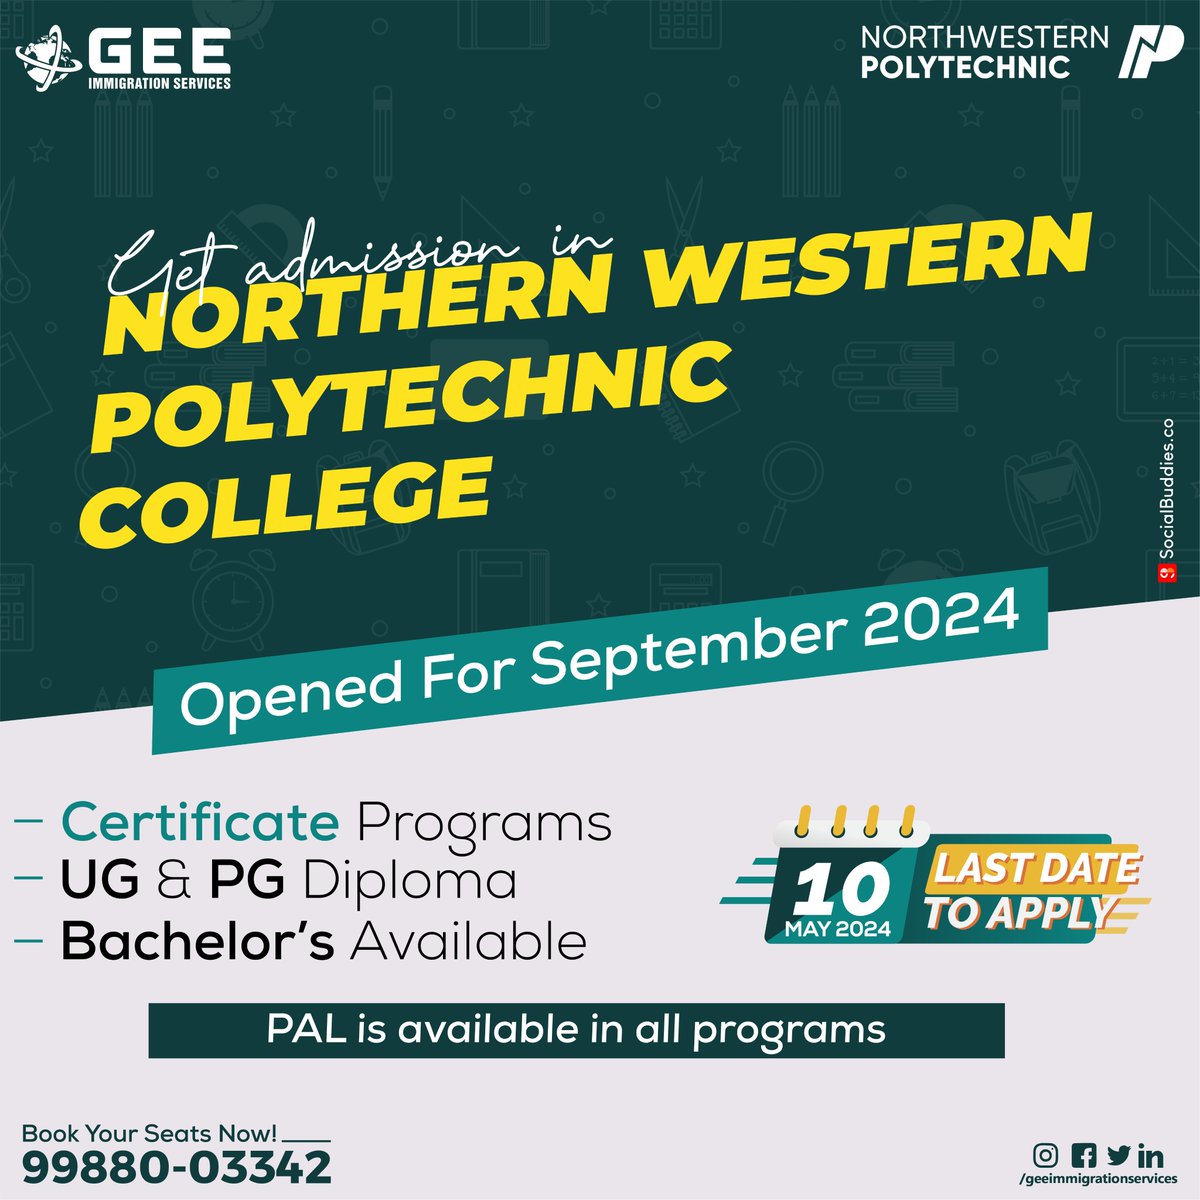 Avail the best options at Northern
Western Polytechnic College.
.
For more info, dial +91 9988003310 
.
#studyvisa #canadavisa #spousevisa #visitorvisa
#livetogether #newjourney #studyoverseas
#immigrationexperts #geeimmigration #gee
#trending #FastProcessing #educationconsultant